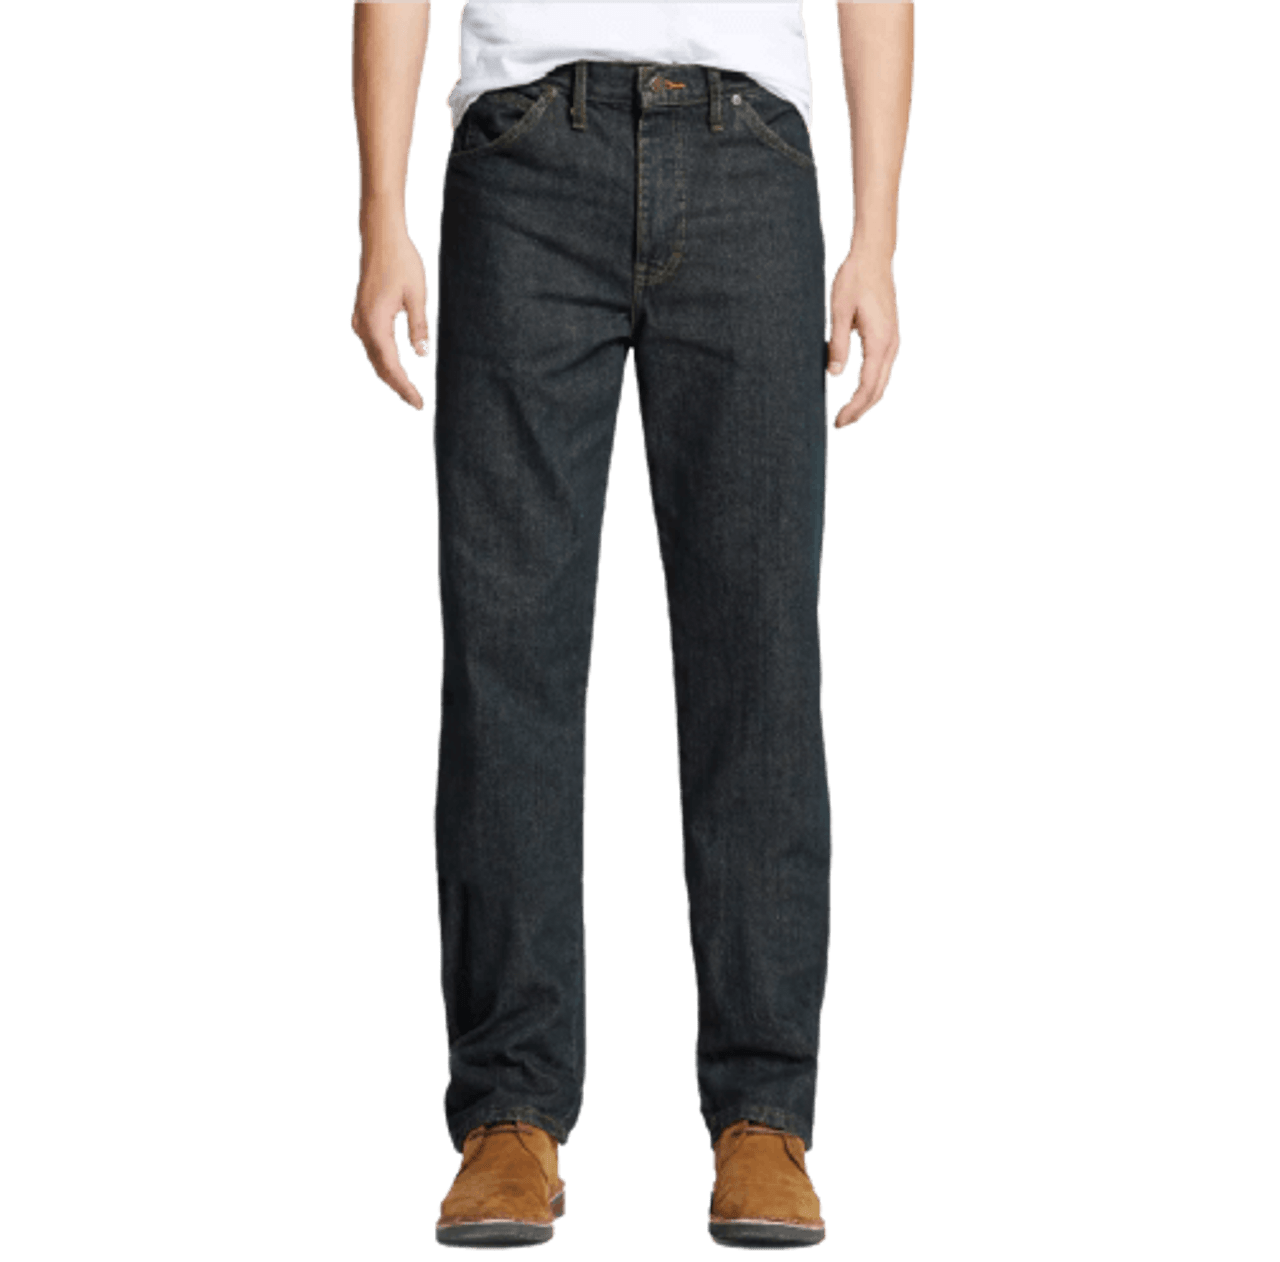 William Dickie Relaxed Fit Carpenter Denim Jeans